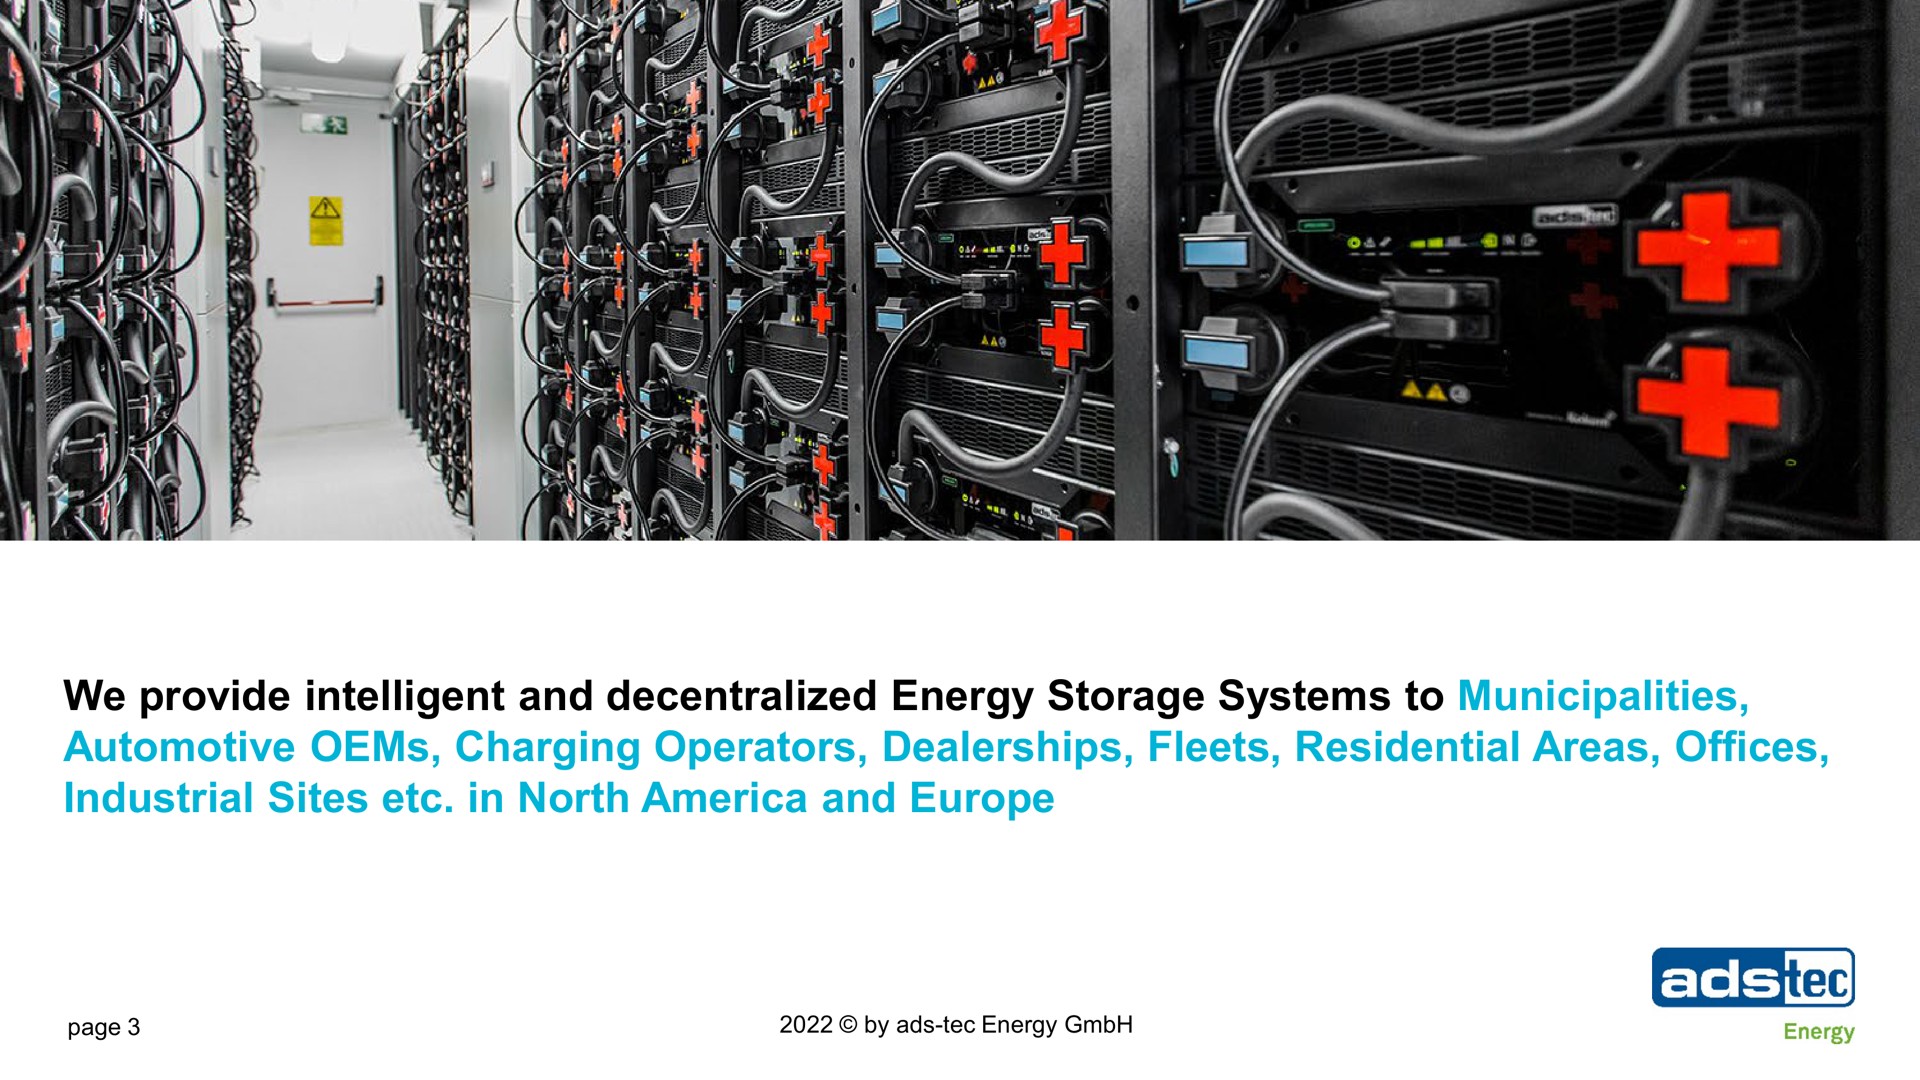 we provide intelligent and decentralized energy storage systems to municipalities | ads-tec Energy